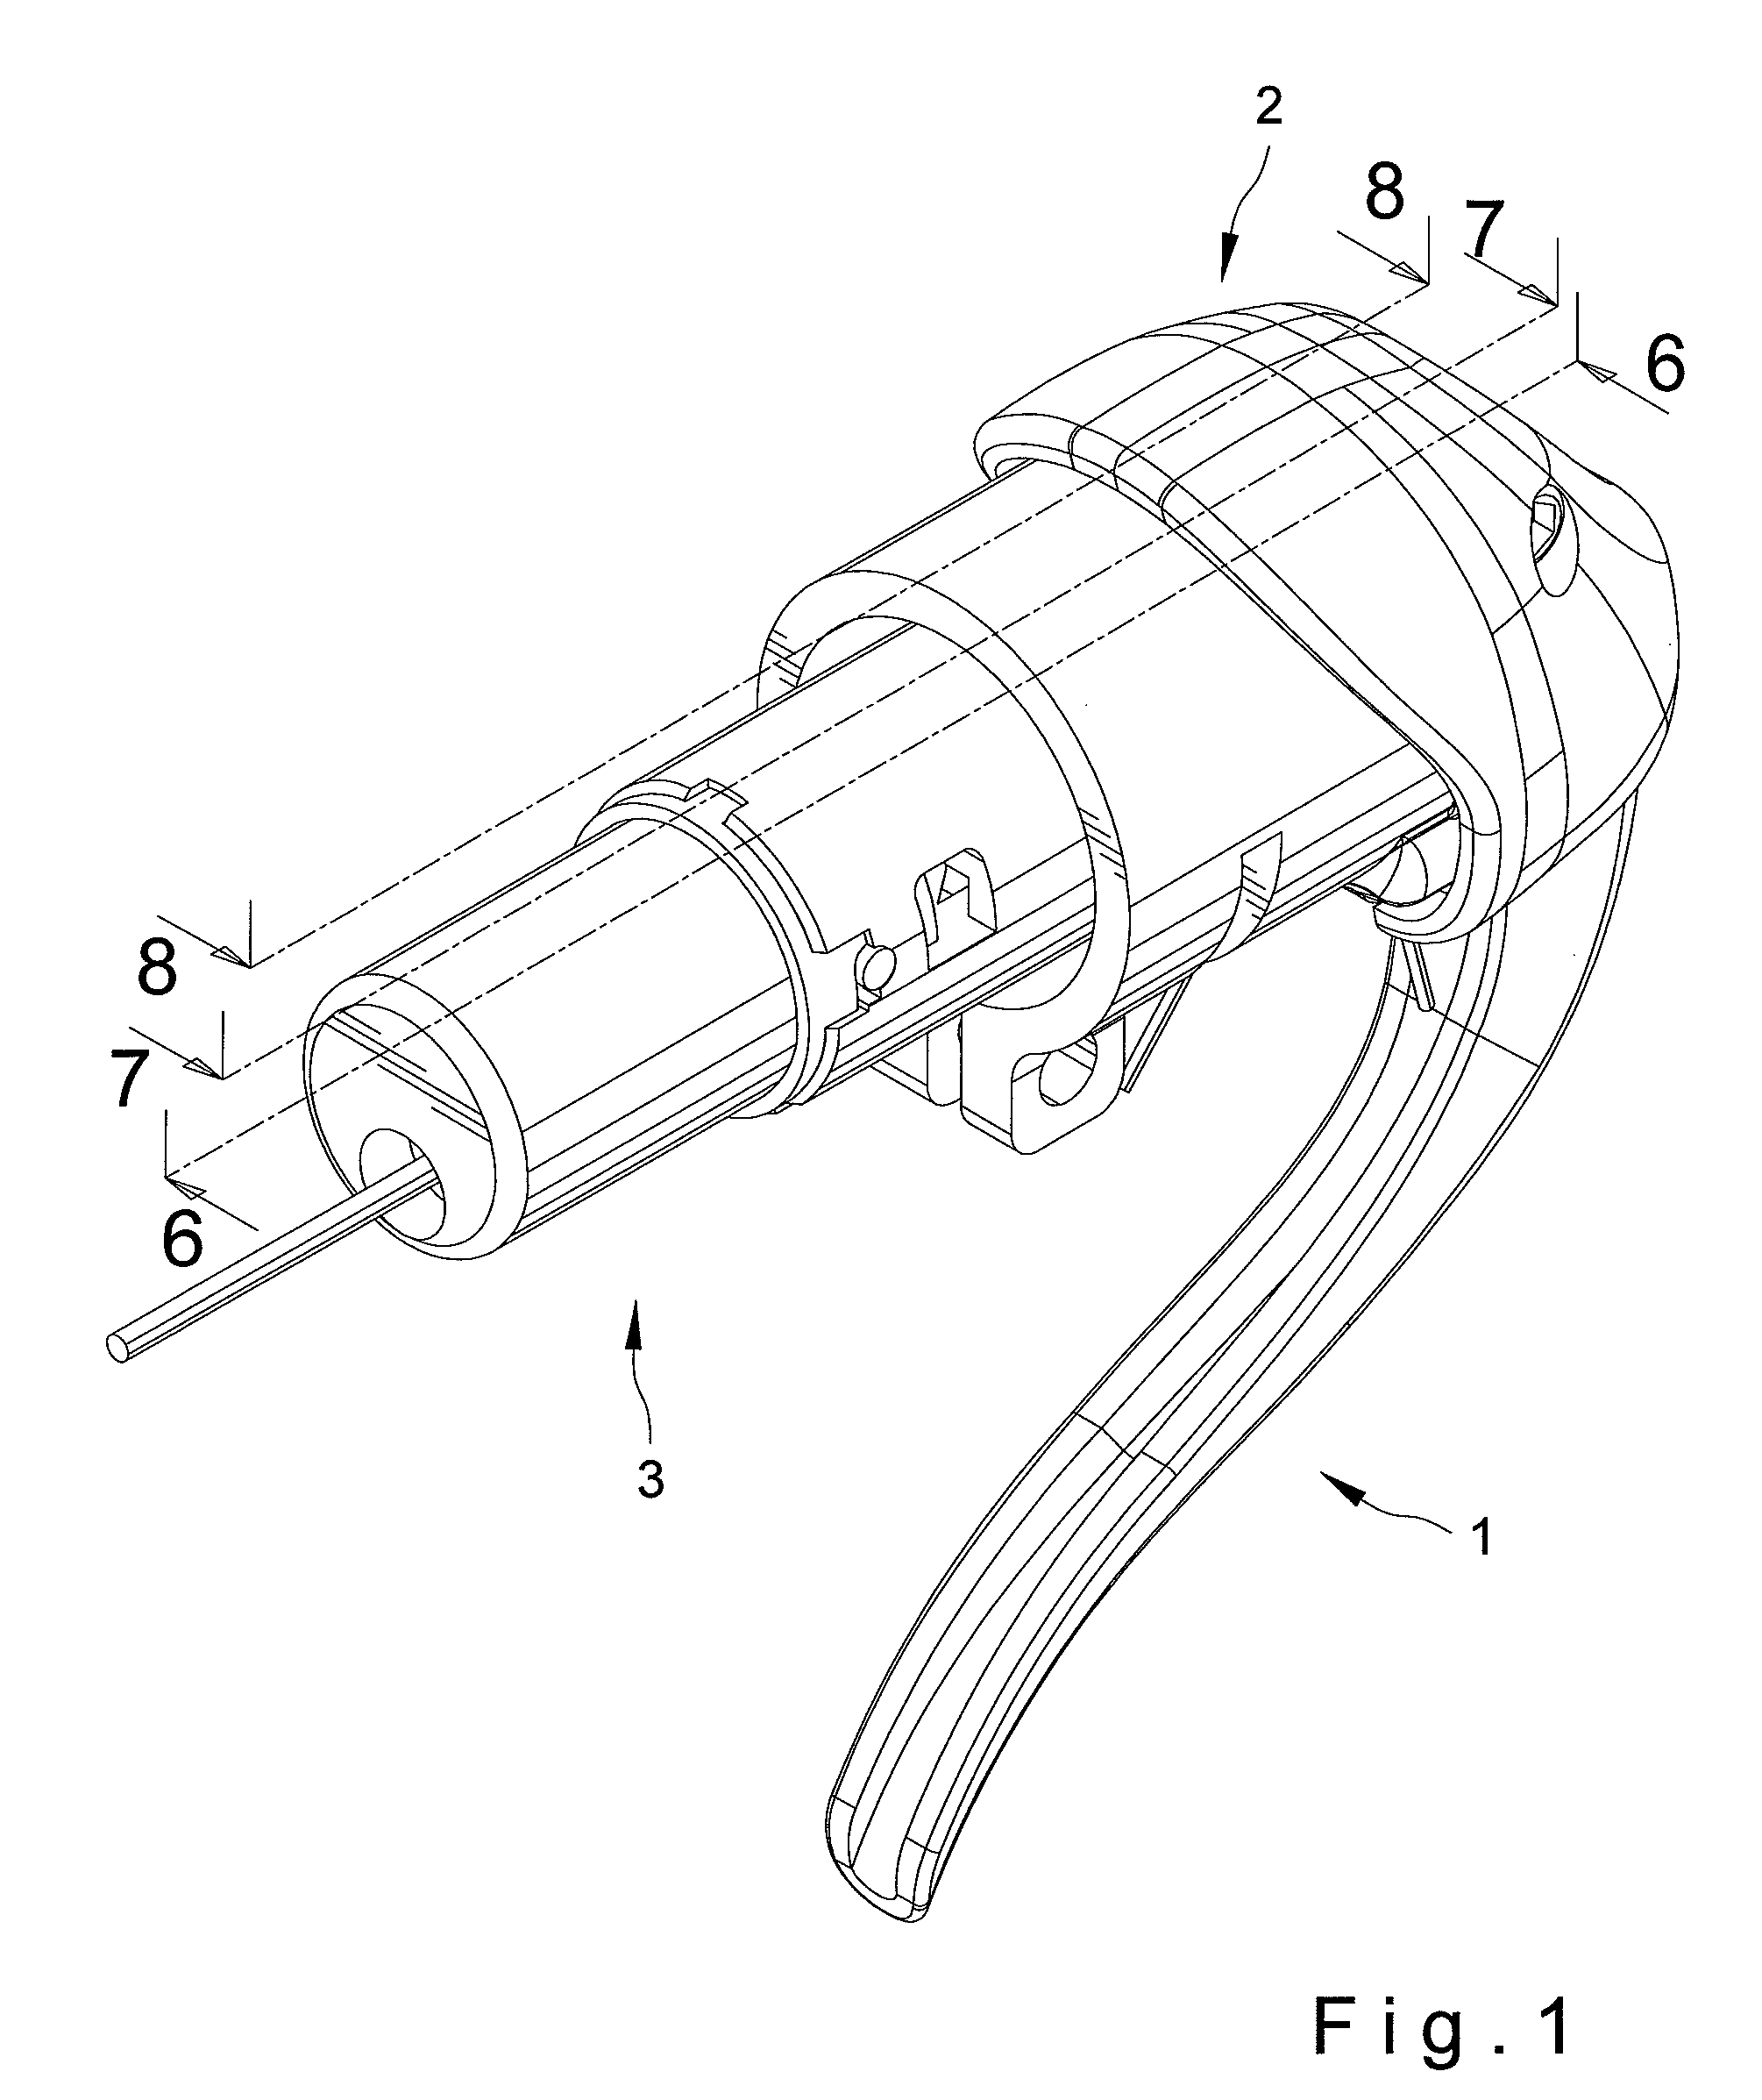 Shift control device for bicycle